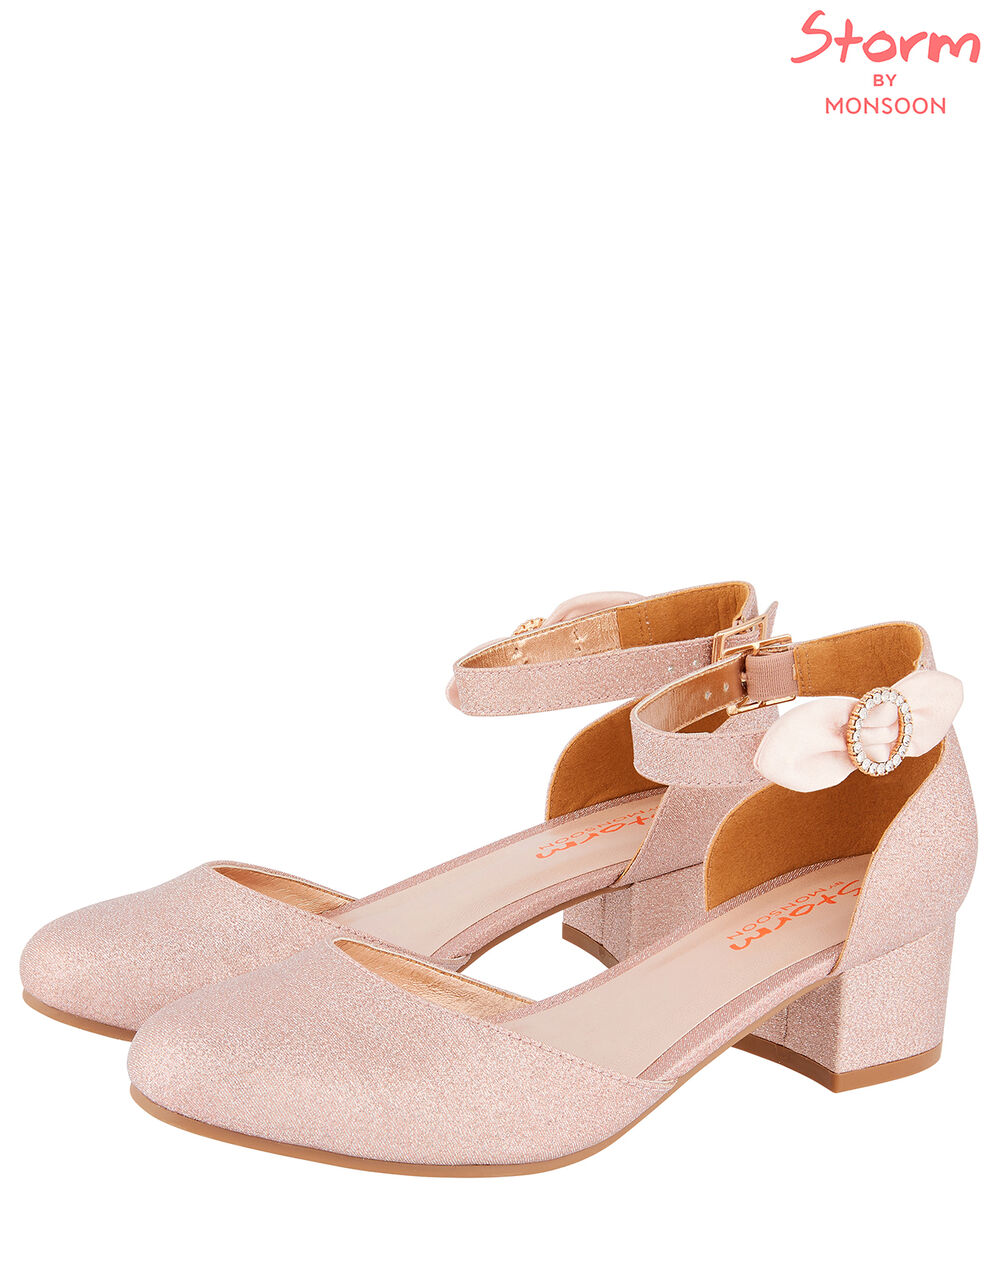 Children Children's Shoes & Sandals | Bow Shimmer Two-Part Heels Pink - GM21191